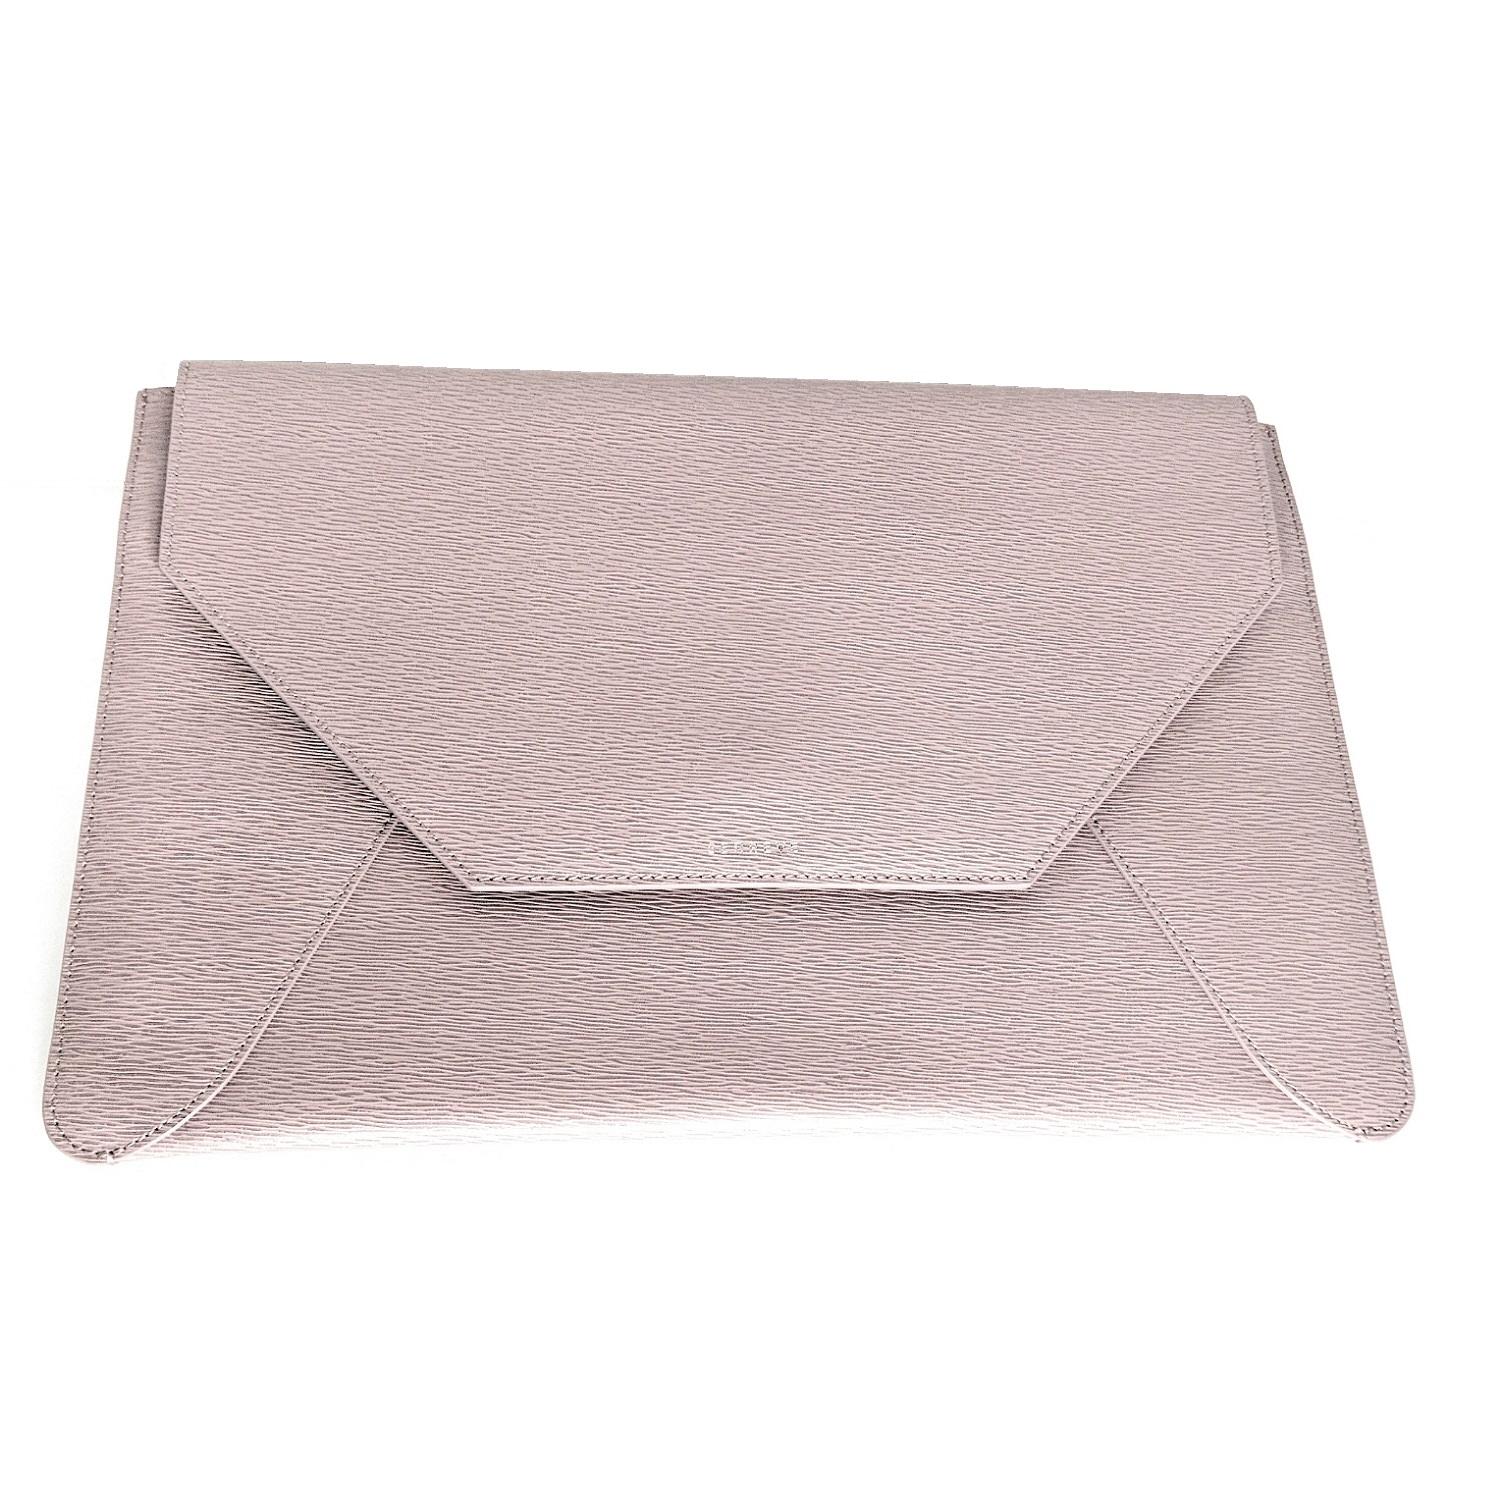 This elegant, leather-bound Envelope Sleeve is perfect for your laptop, work documents, and other daily essentials. It can be carried as an evening bag, computer case, or portfolio clutch. The main compartment fits up to a 13” MacBook. Retail price